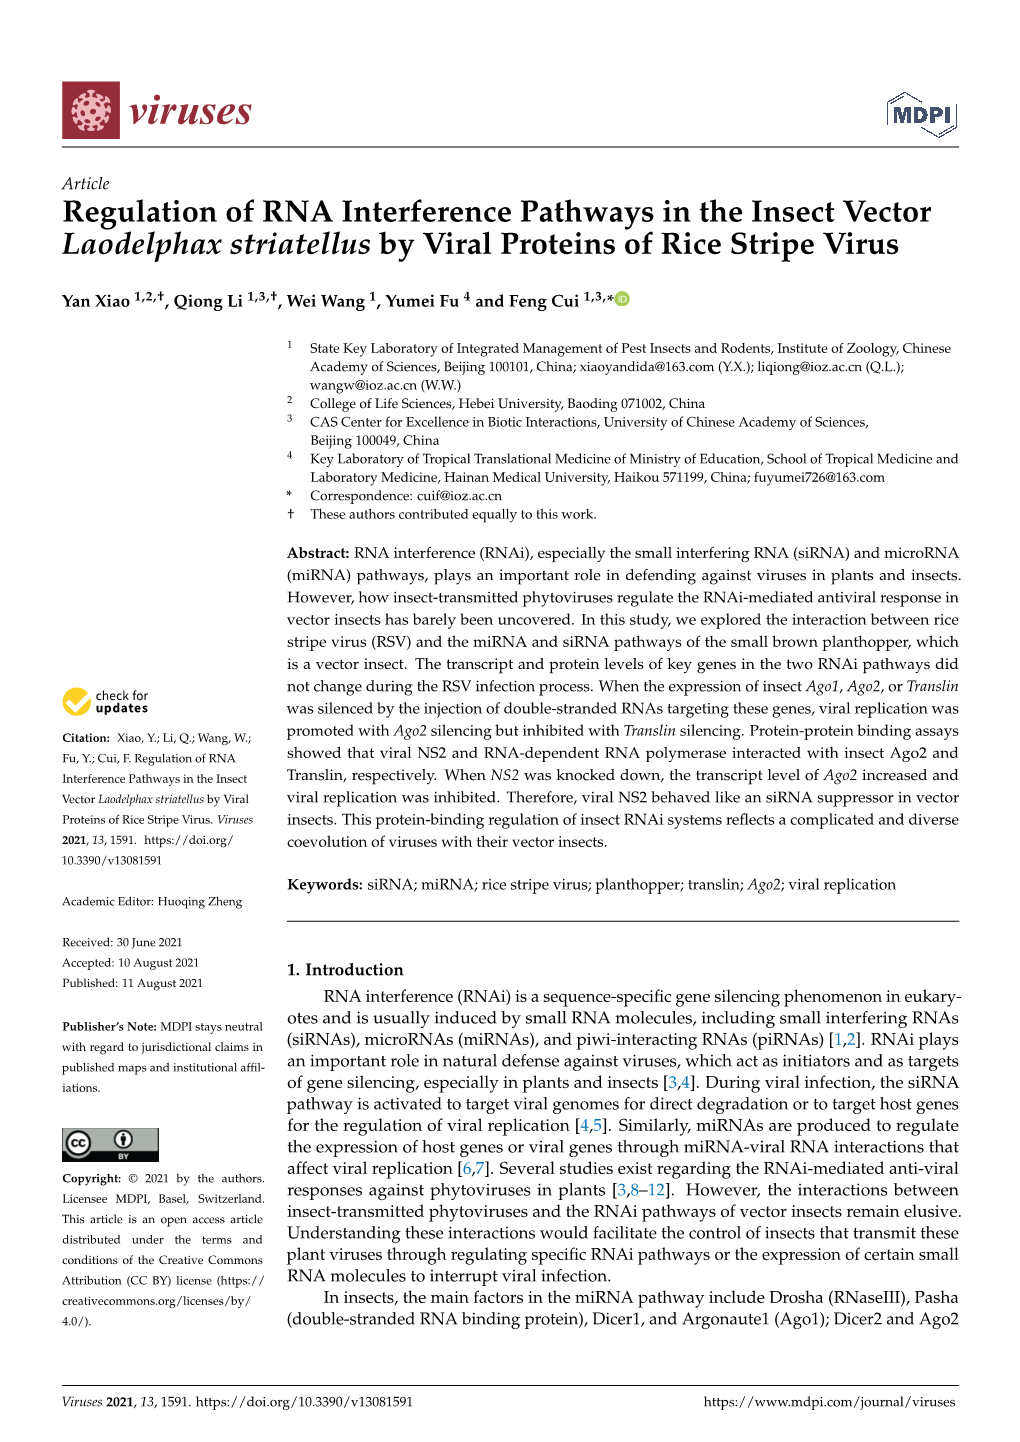 Regulation of RNA Interference Pathways in the Insect Vector Laodelphax Striatellus by Viral Proteins of Rice Stripe Virus